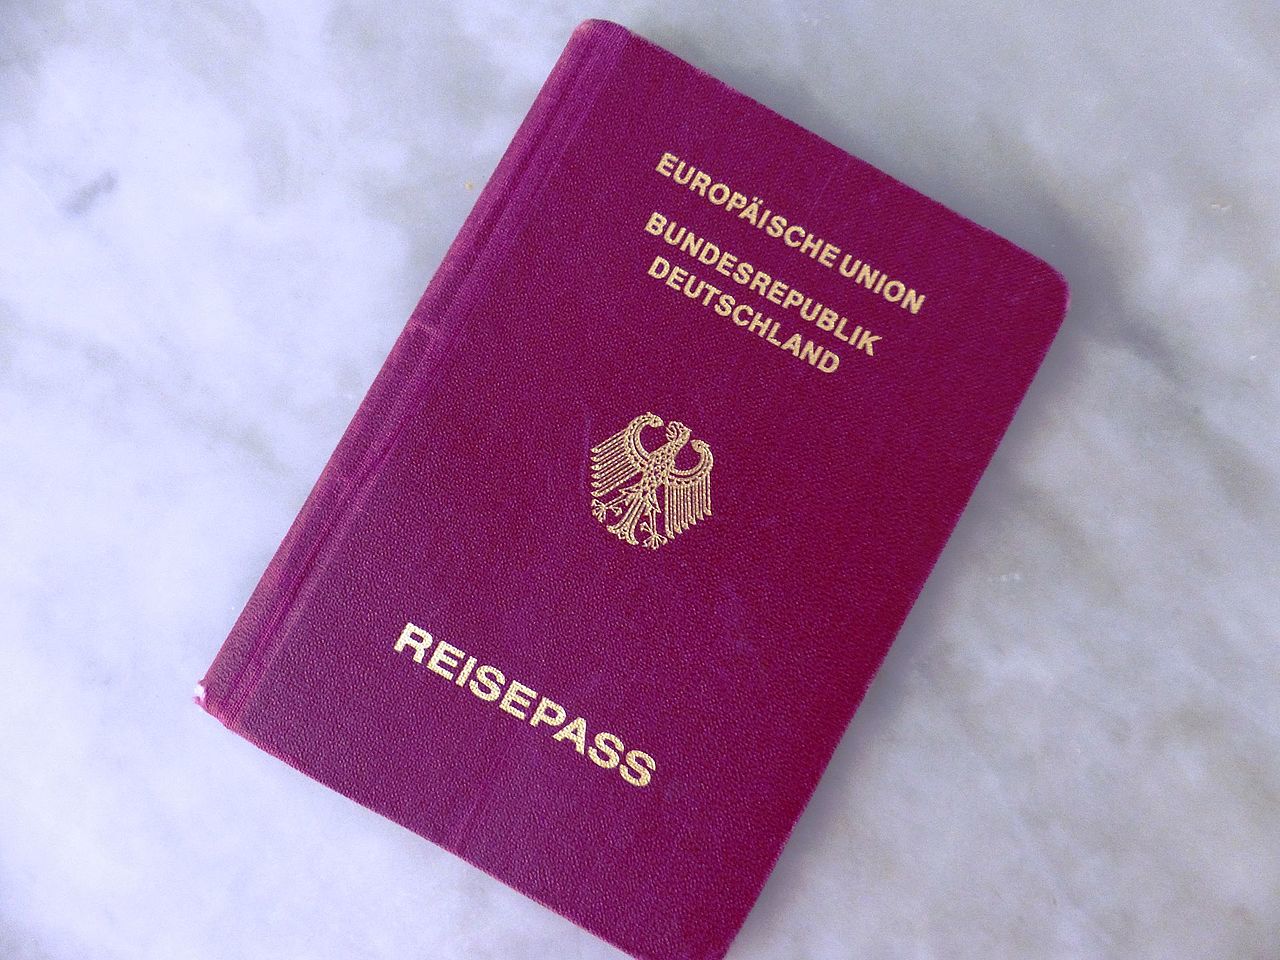 Germany’s new dual citizenship law